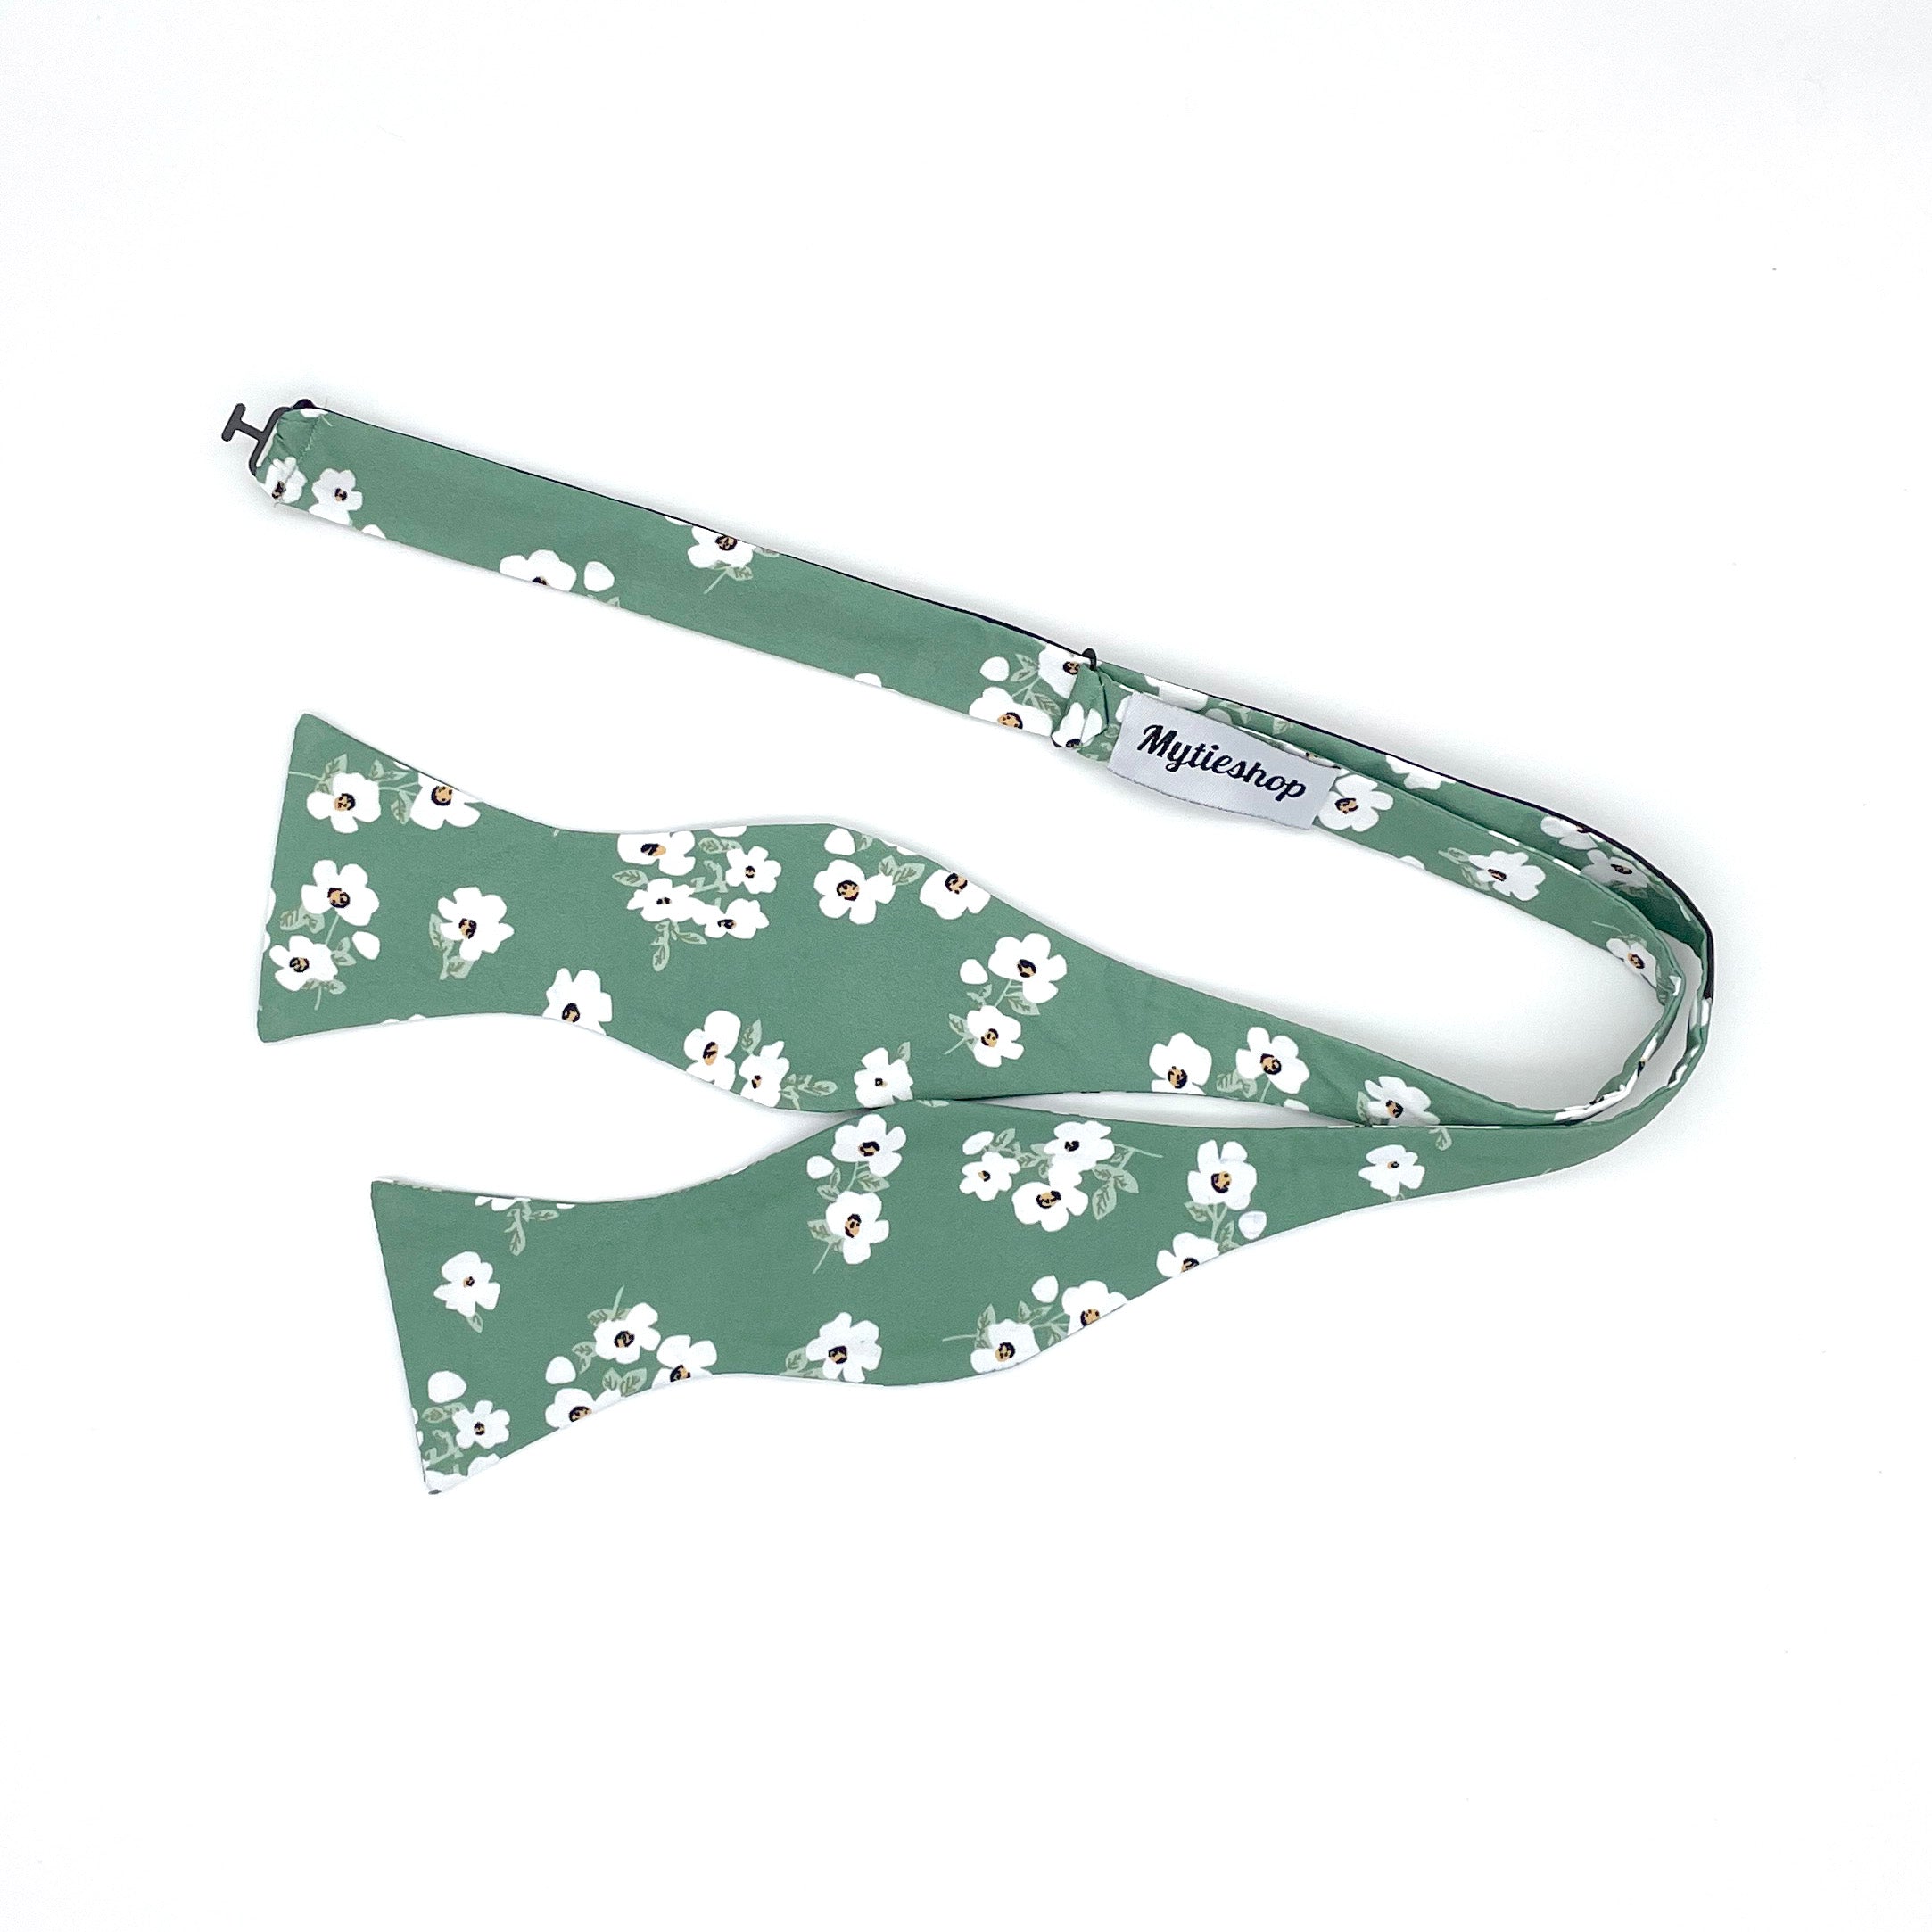 Sage Green Floral Bow Tie Men Self Tie - AUGUST - MYTIESHOP-Floral bow tie men - August floral bow tie - Color: Green 100% Cotton Flannel Handmade Adjustable to fit most neck sizes 13 3/4&quot; - 18&quot; Great for: Weddings Elopements Gift Anniversaries Events This beautiful bow tie is perfect for an elopement or wedding. The sage green and off white flowers on this bow tie make it perfect for a spring or summer wedding. The self tie bow tie makes it easy to adjust and fit to your size. This bow tie woul